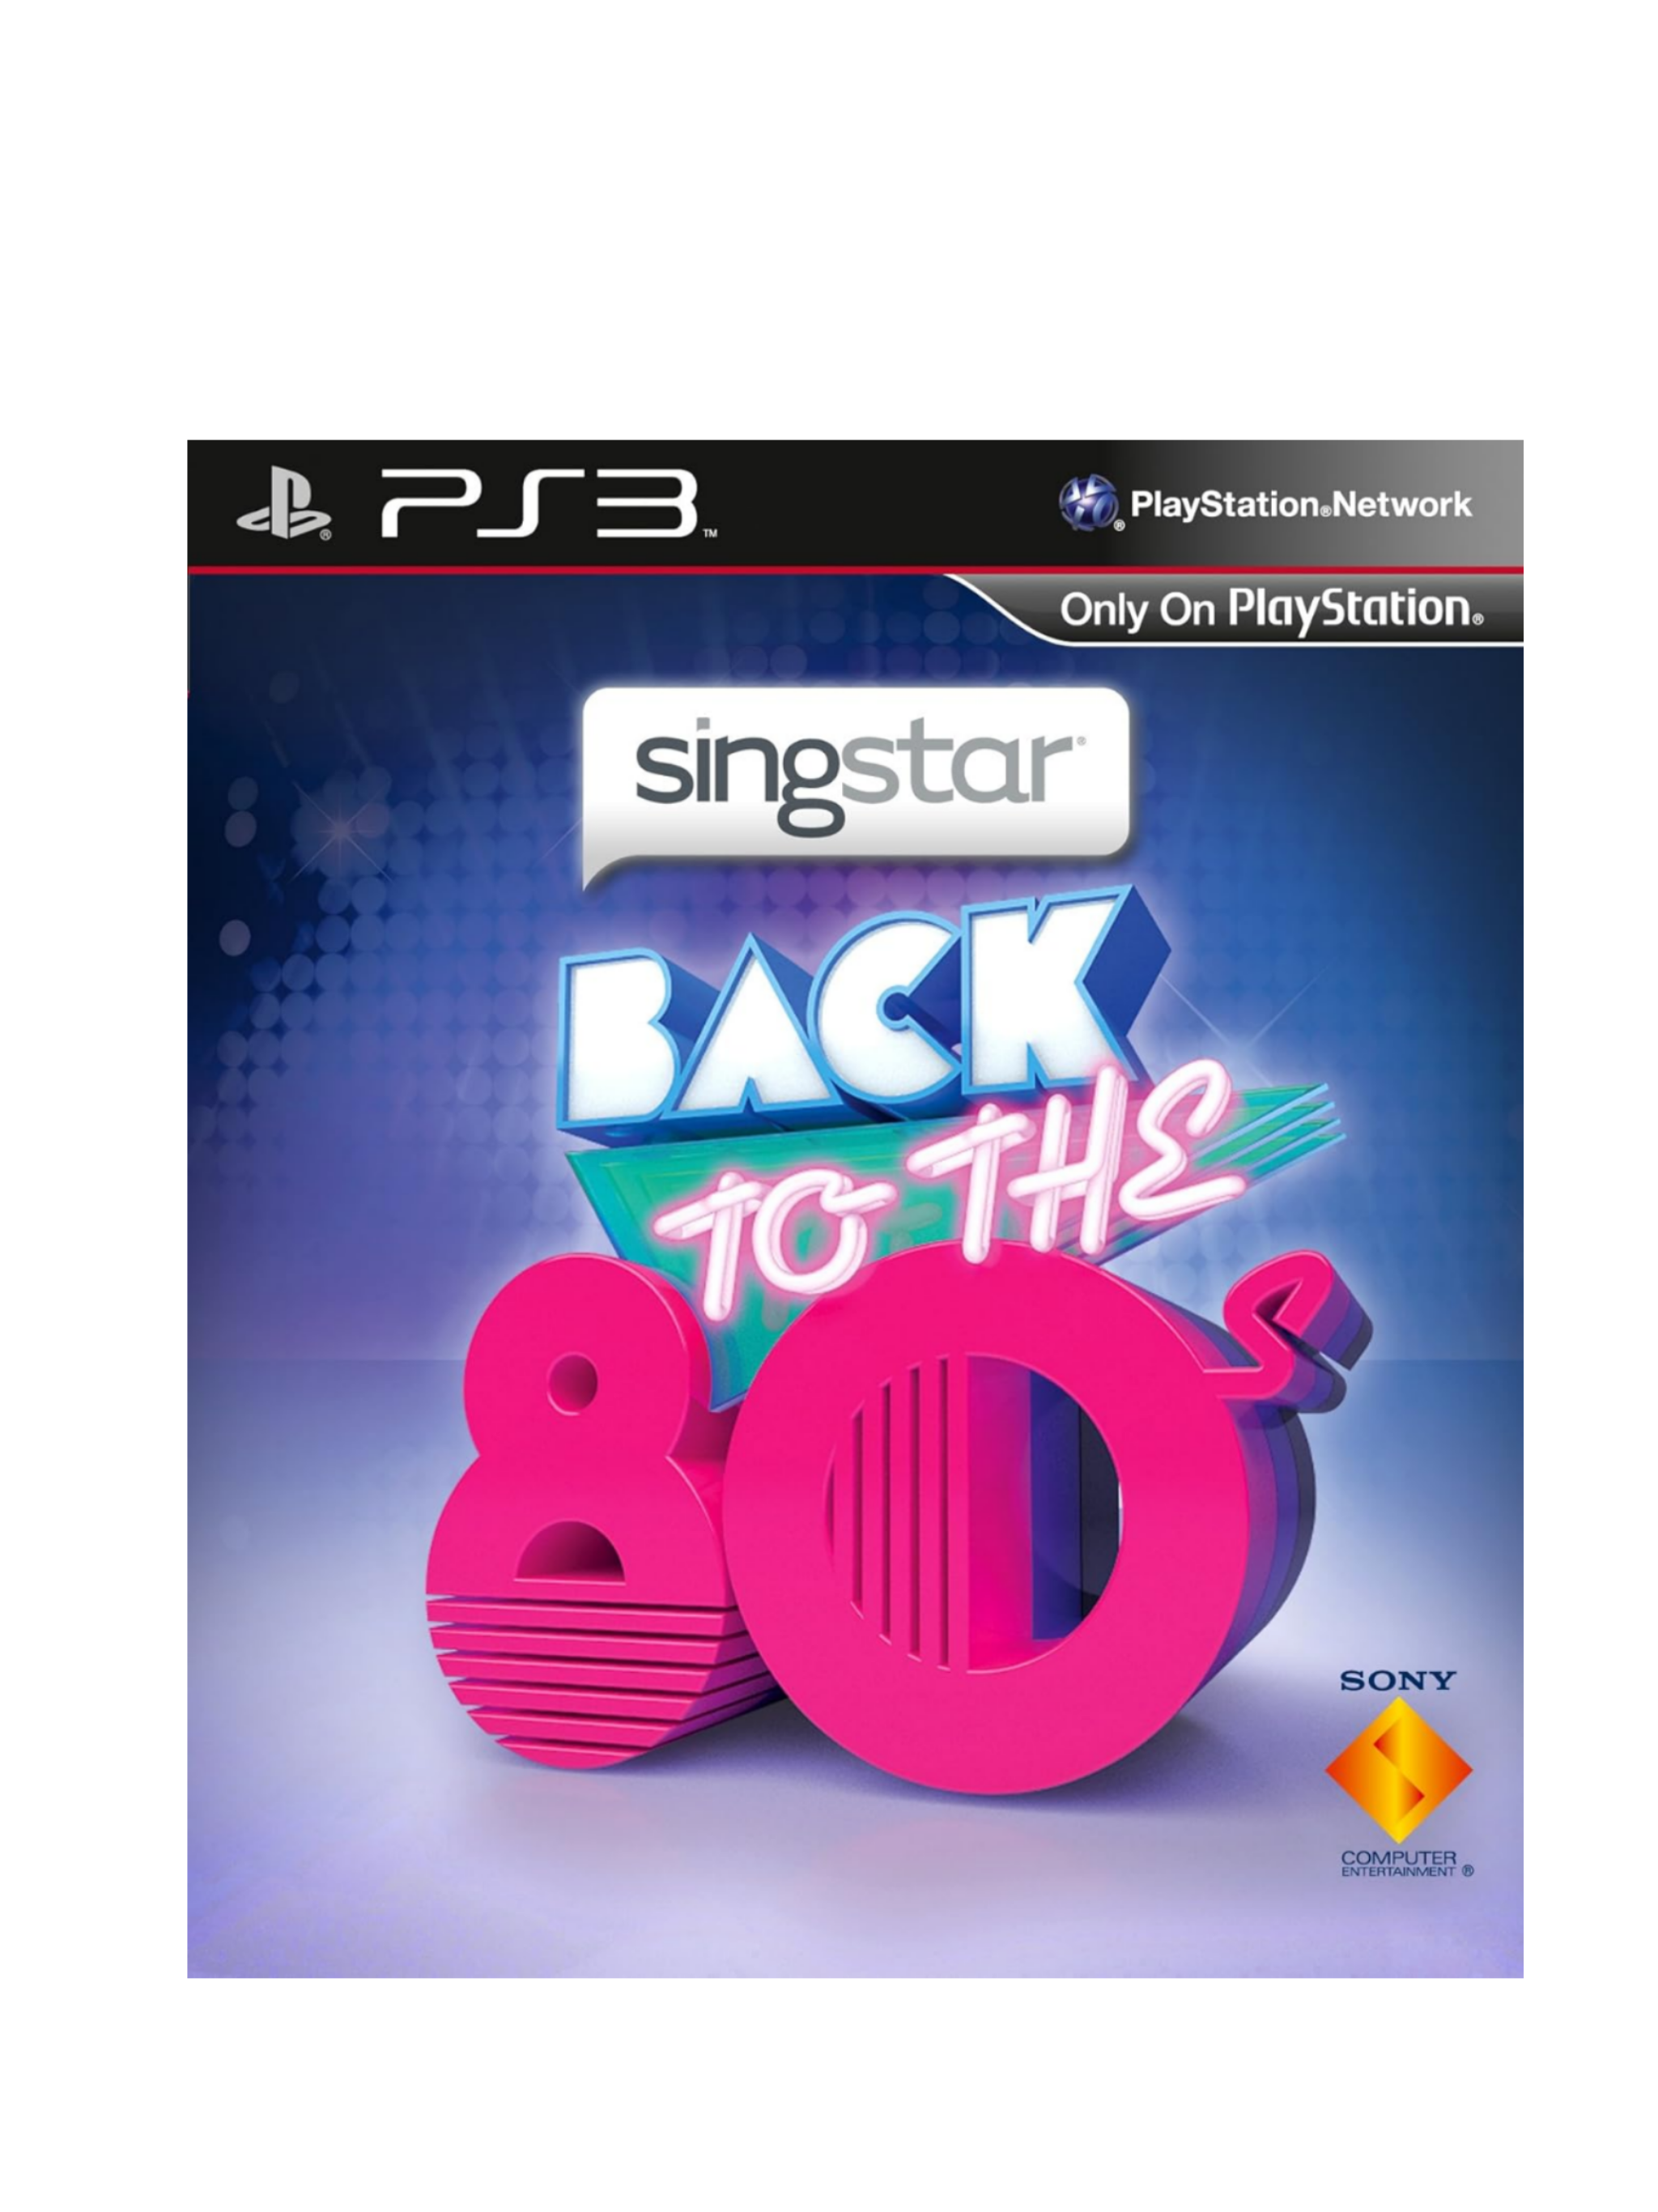 SingStar Back to the 80's PS3